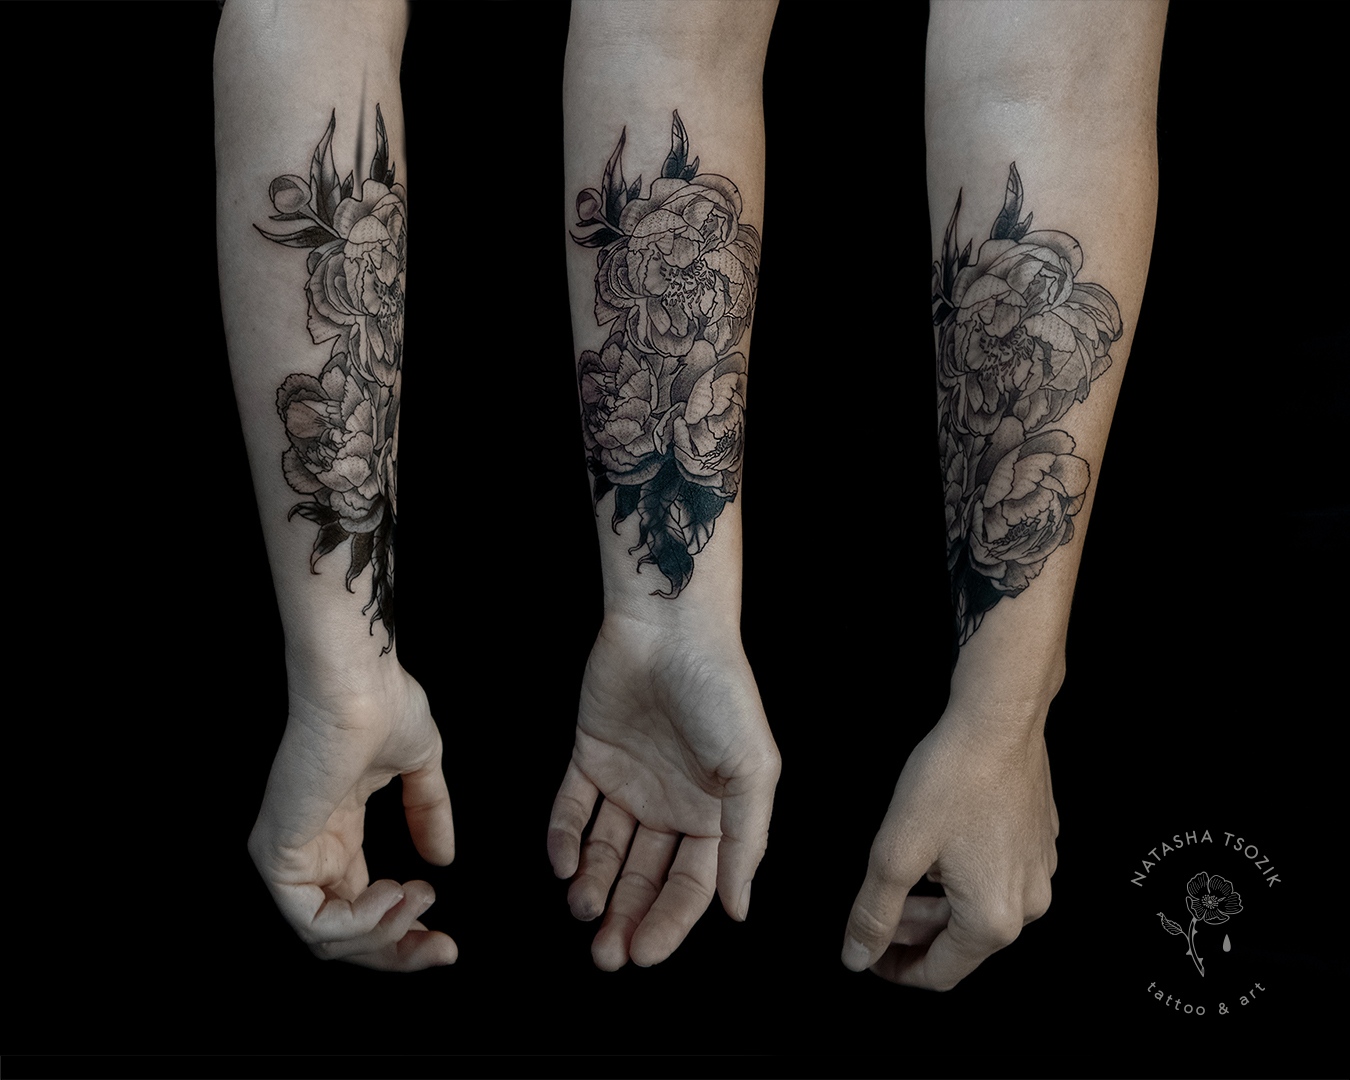 All sizes  Black and Grey Skull Bone and Flowers Tattoo Cover Up  Flickr   Photo Sharing